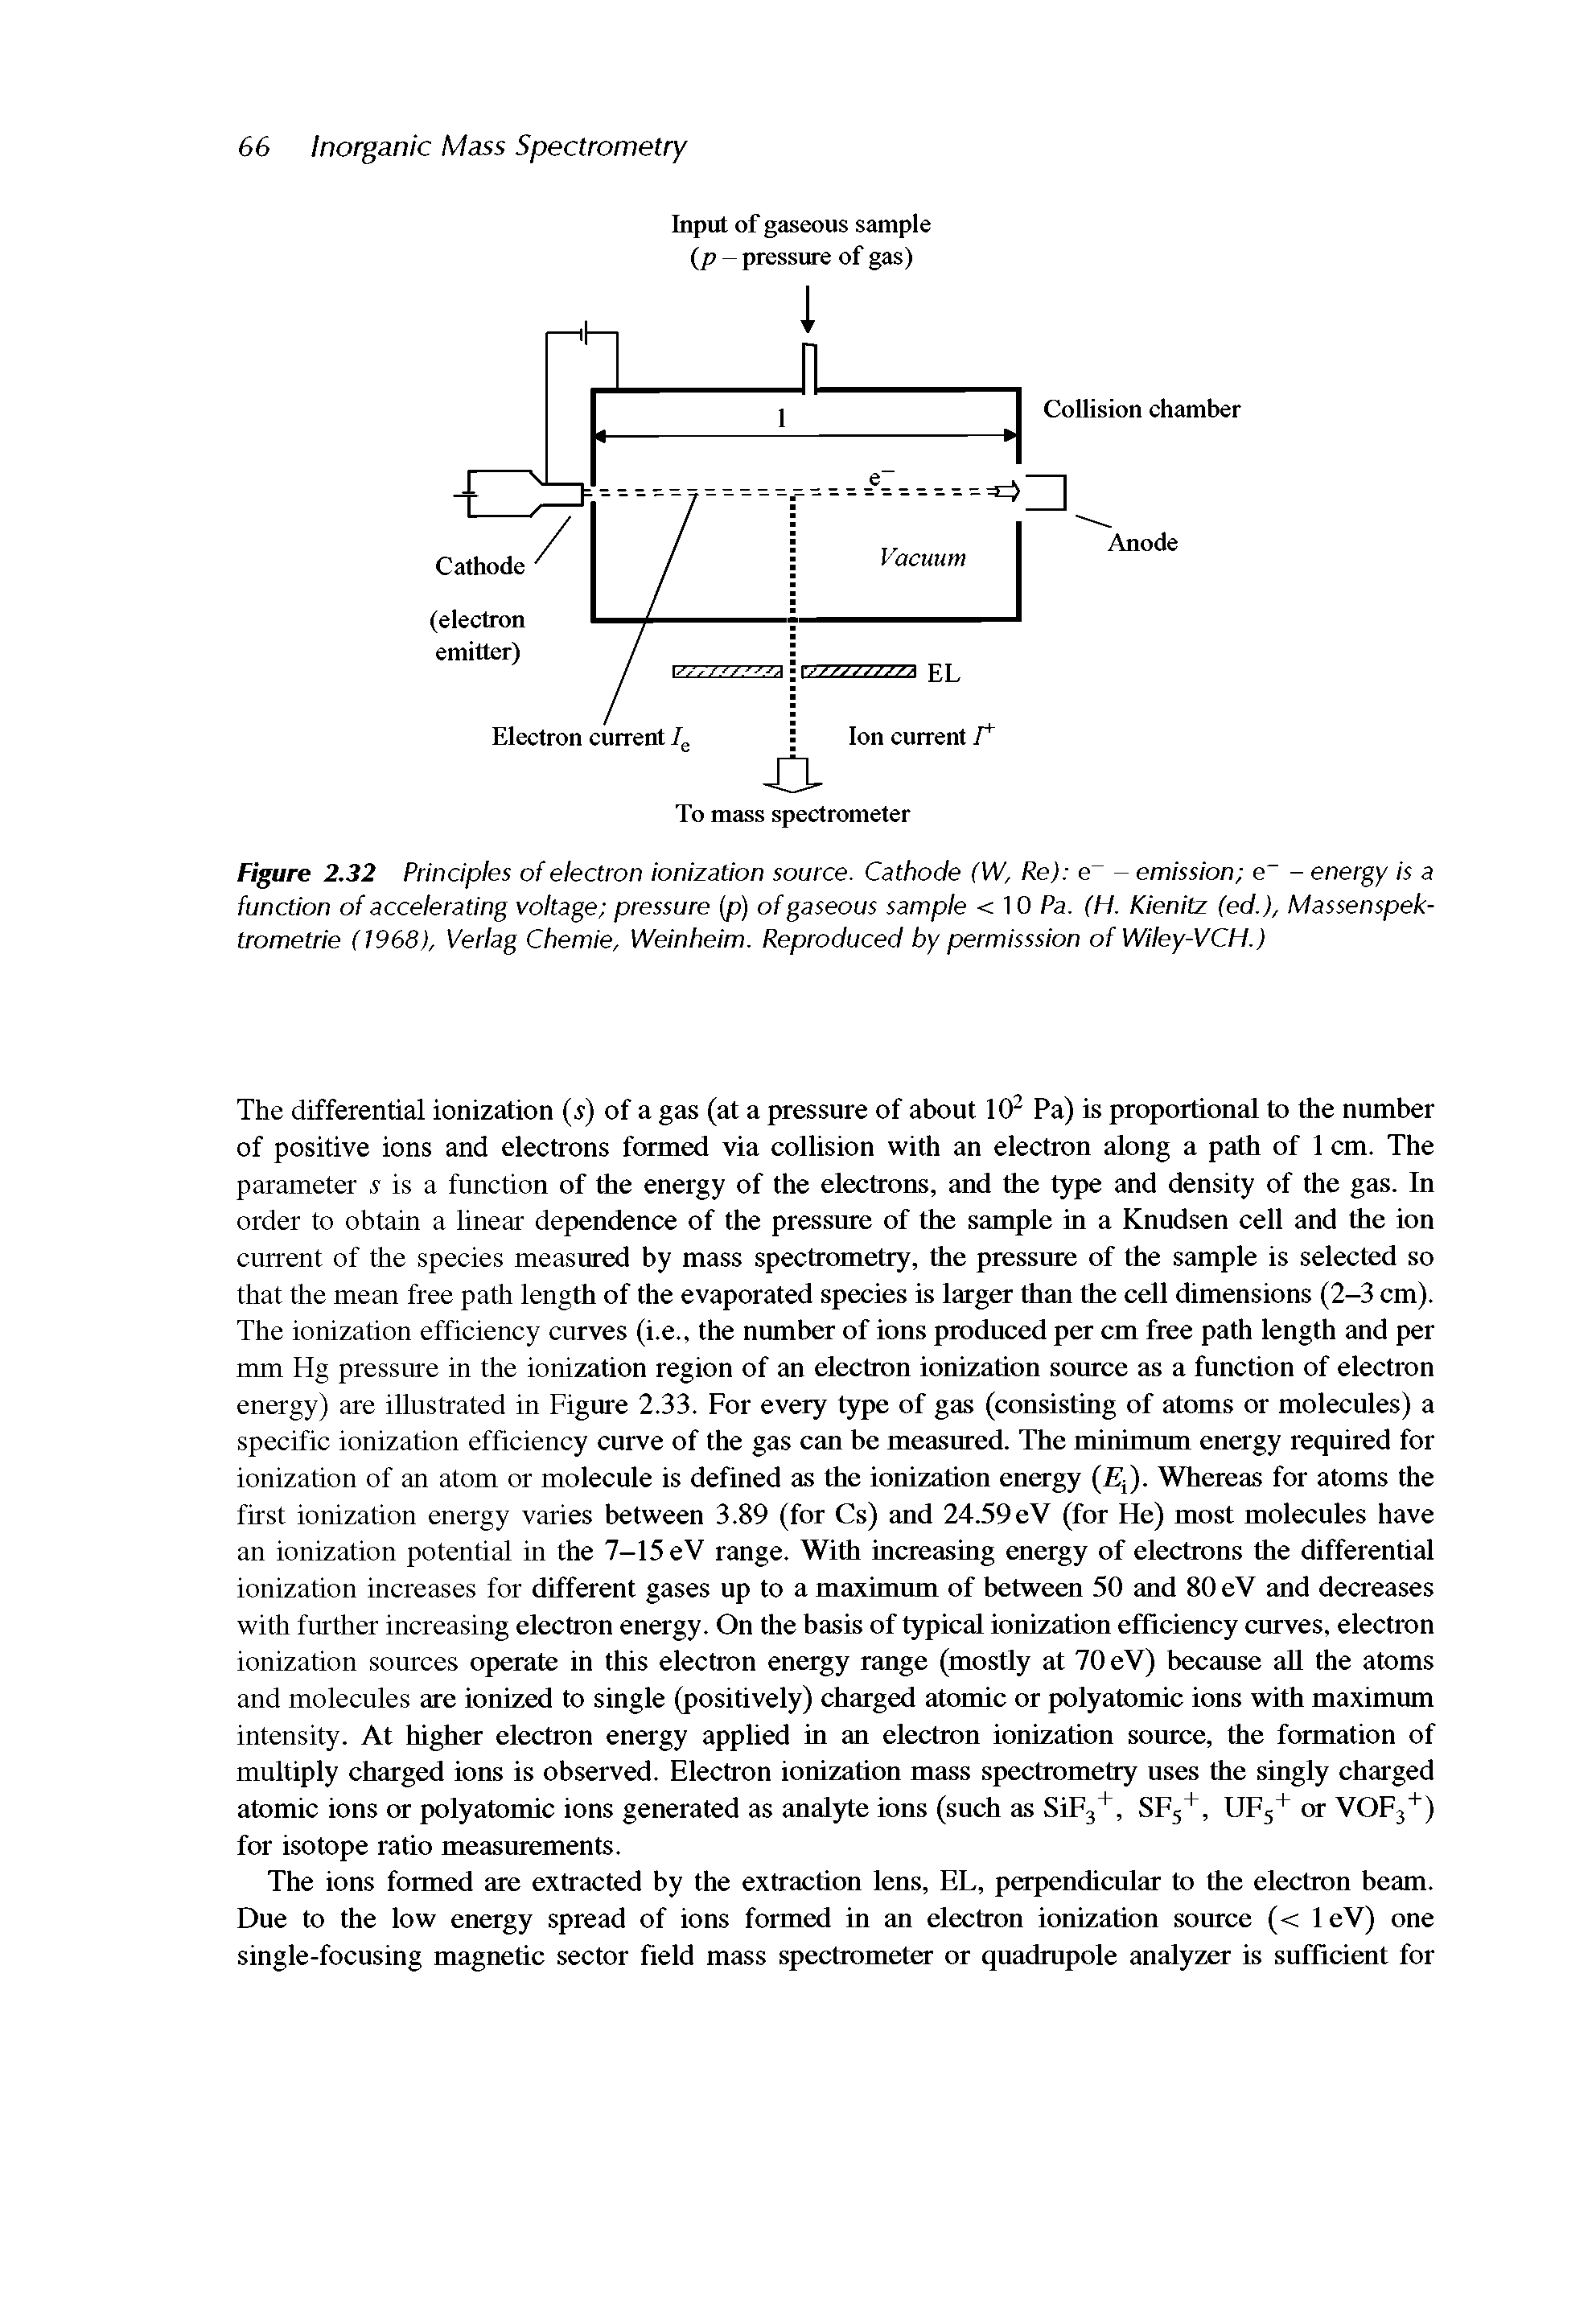 Figure 2.32 Principles of electron ionization source. Cathode (W, Re) e - emission e - energy is a function of accelerating voltage pressure (p) of gaseous sample <10 Pa. (H. Kienitz (ed.), Massenspek-trometrie (1968), Verlag Chemie, Weinheim. Reproduced by permisssion of Wiley-VCH.)...